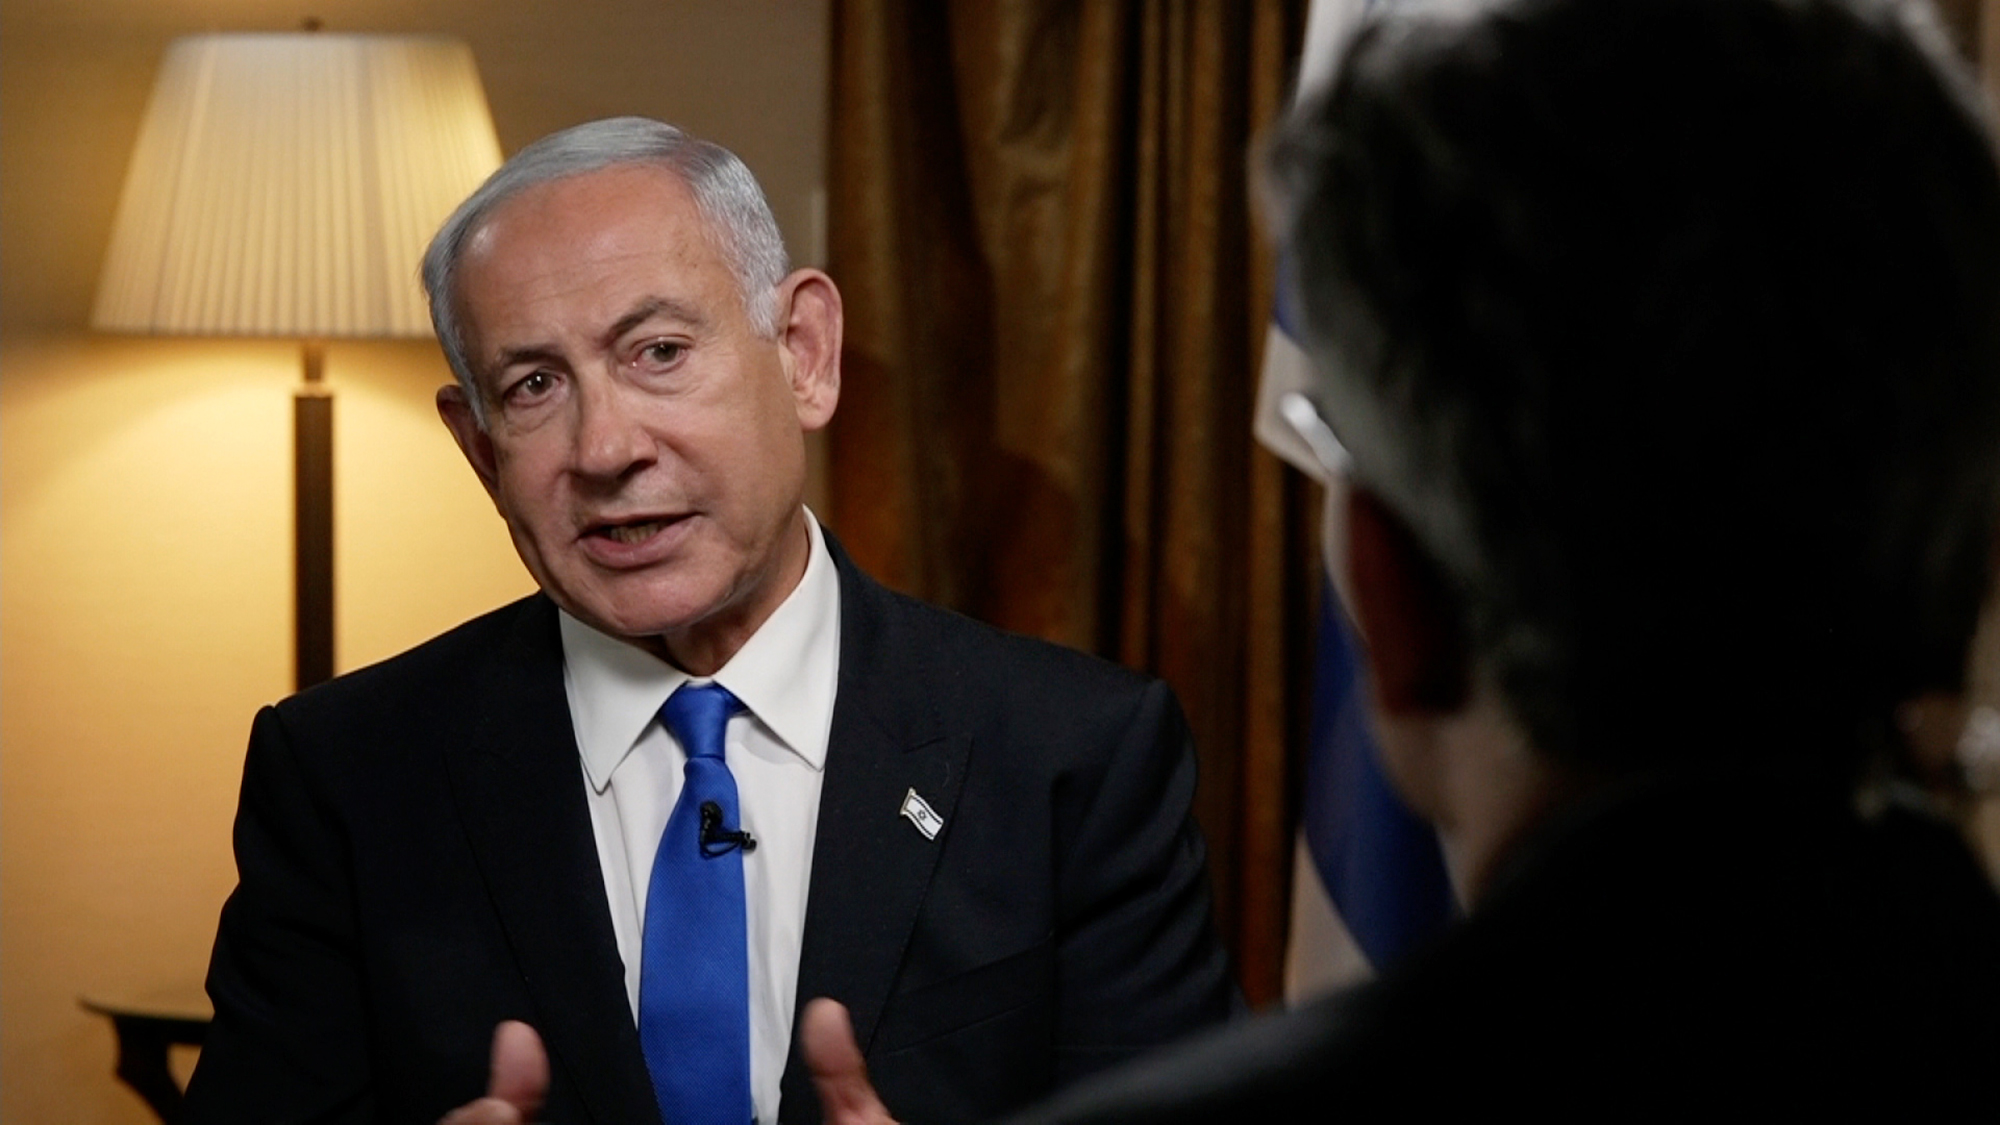 Israel’s Prime Minister Benjamin Netanyahu gives an interview to CNN’s Jake Tapper on January 31.